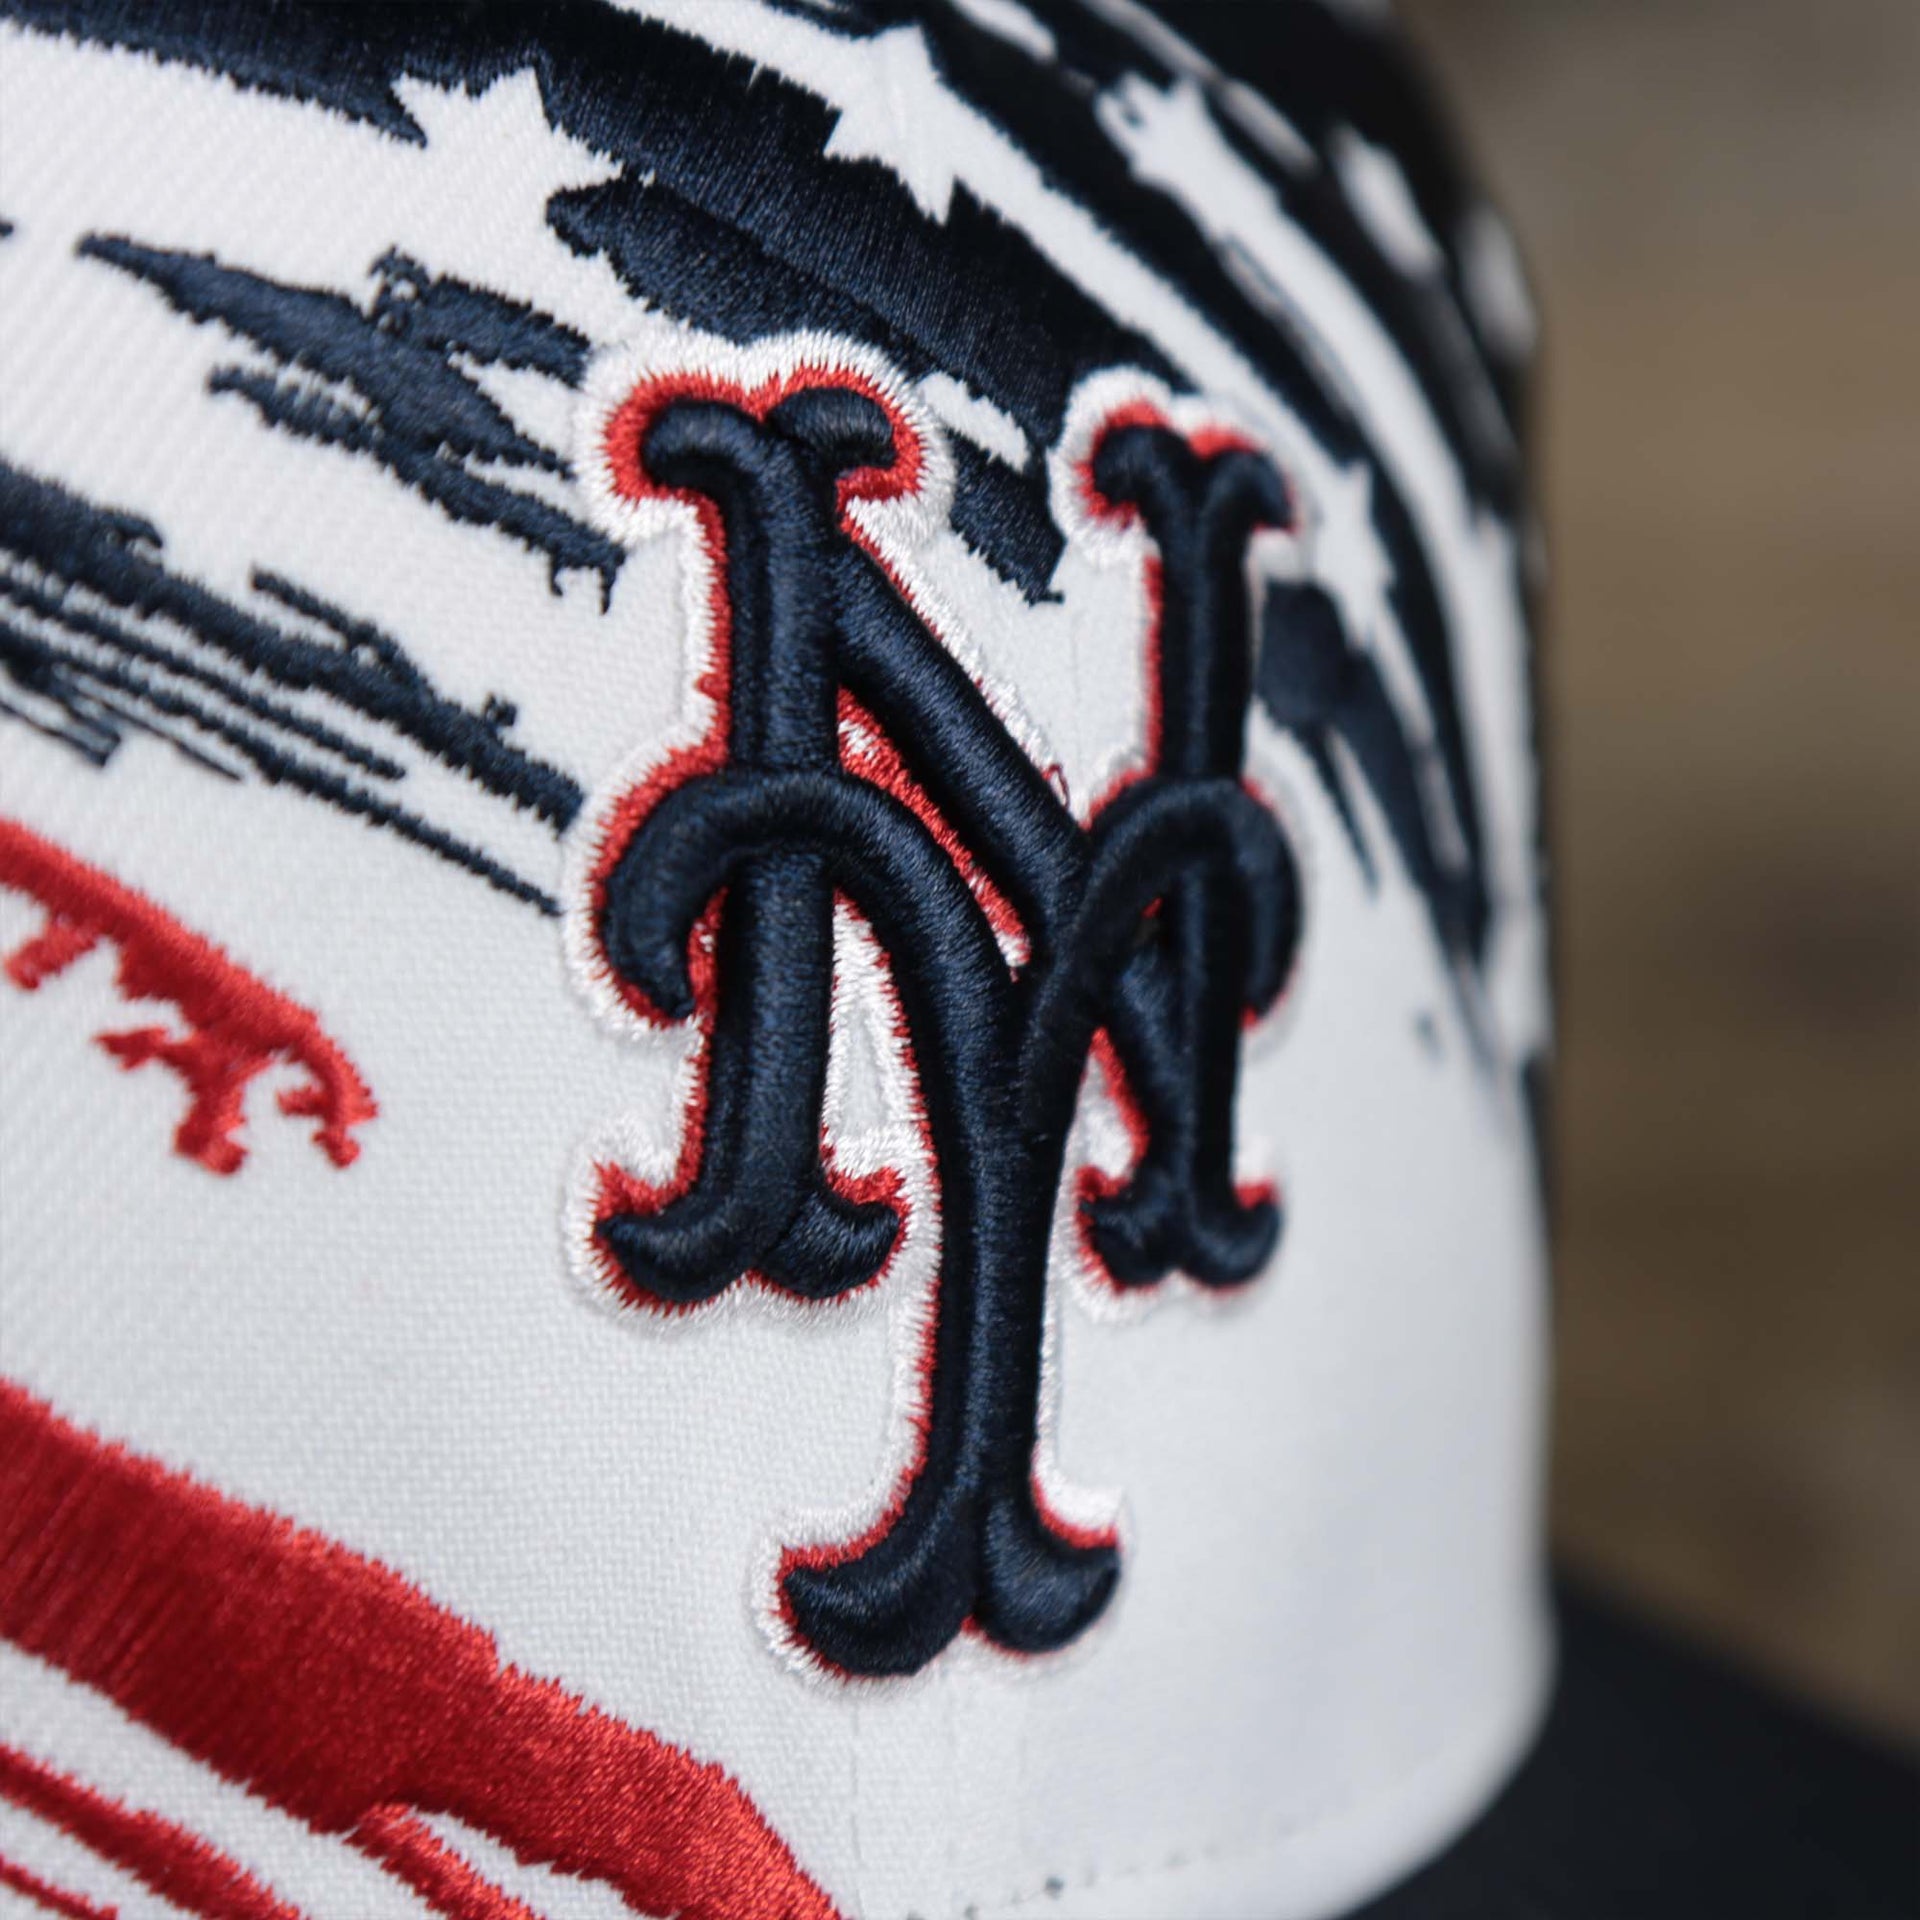 The Mets Logo on the New York Mets 2022 4th of July Stars And Stripes 9Fifty | New Era Navy OSFM